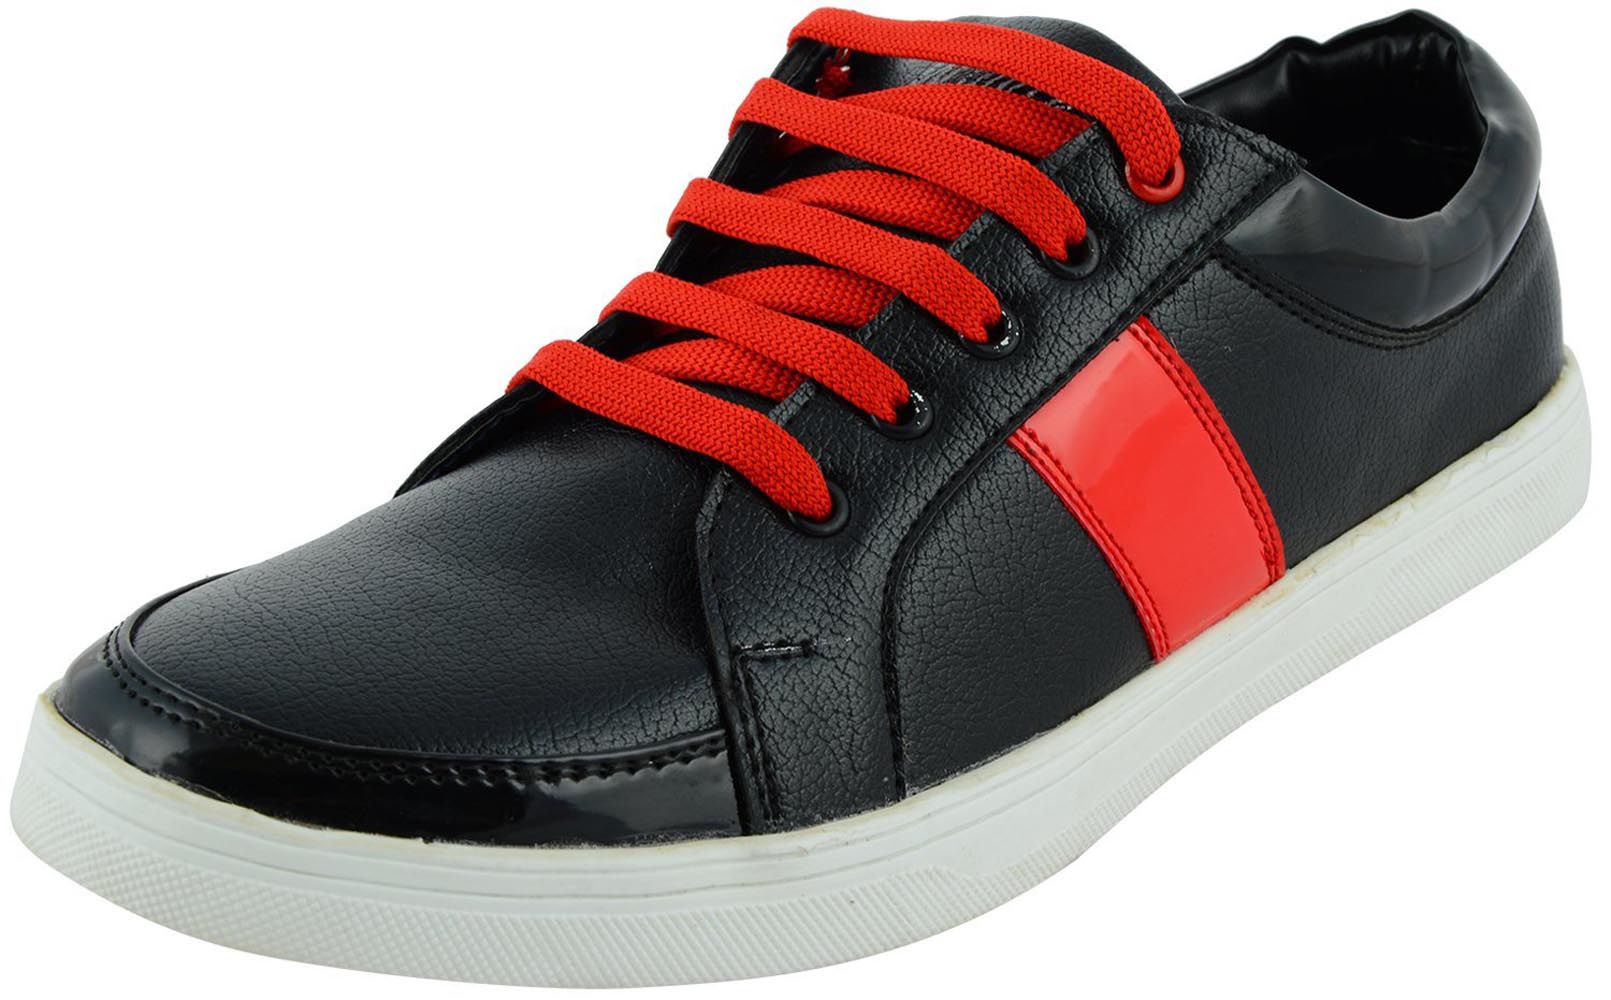 Buy Footgear Mens Casual Shoes (M-CA-3-Red) Online @ ₹1999 from ShopClues